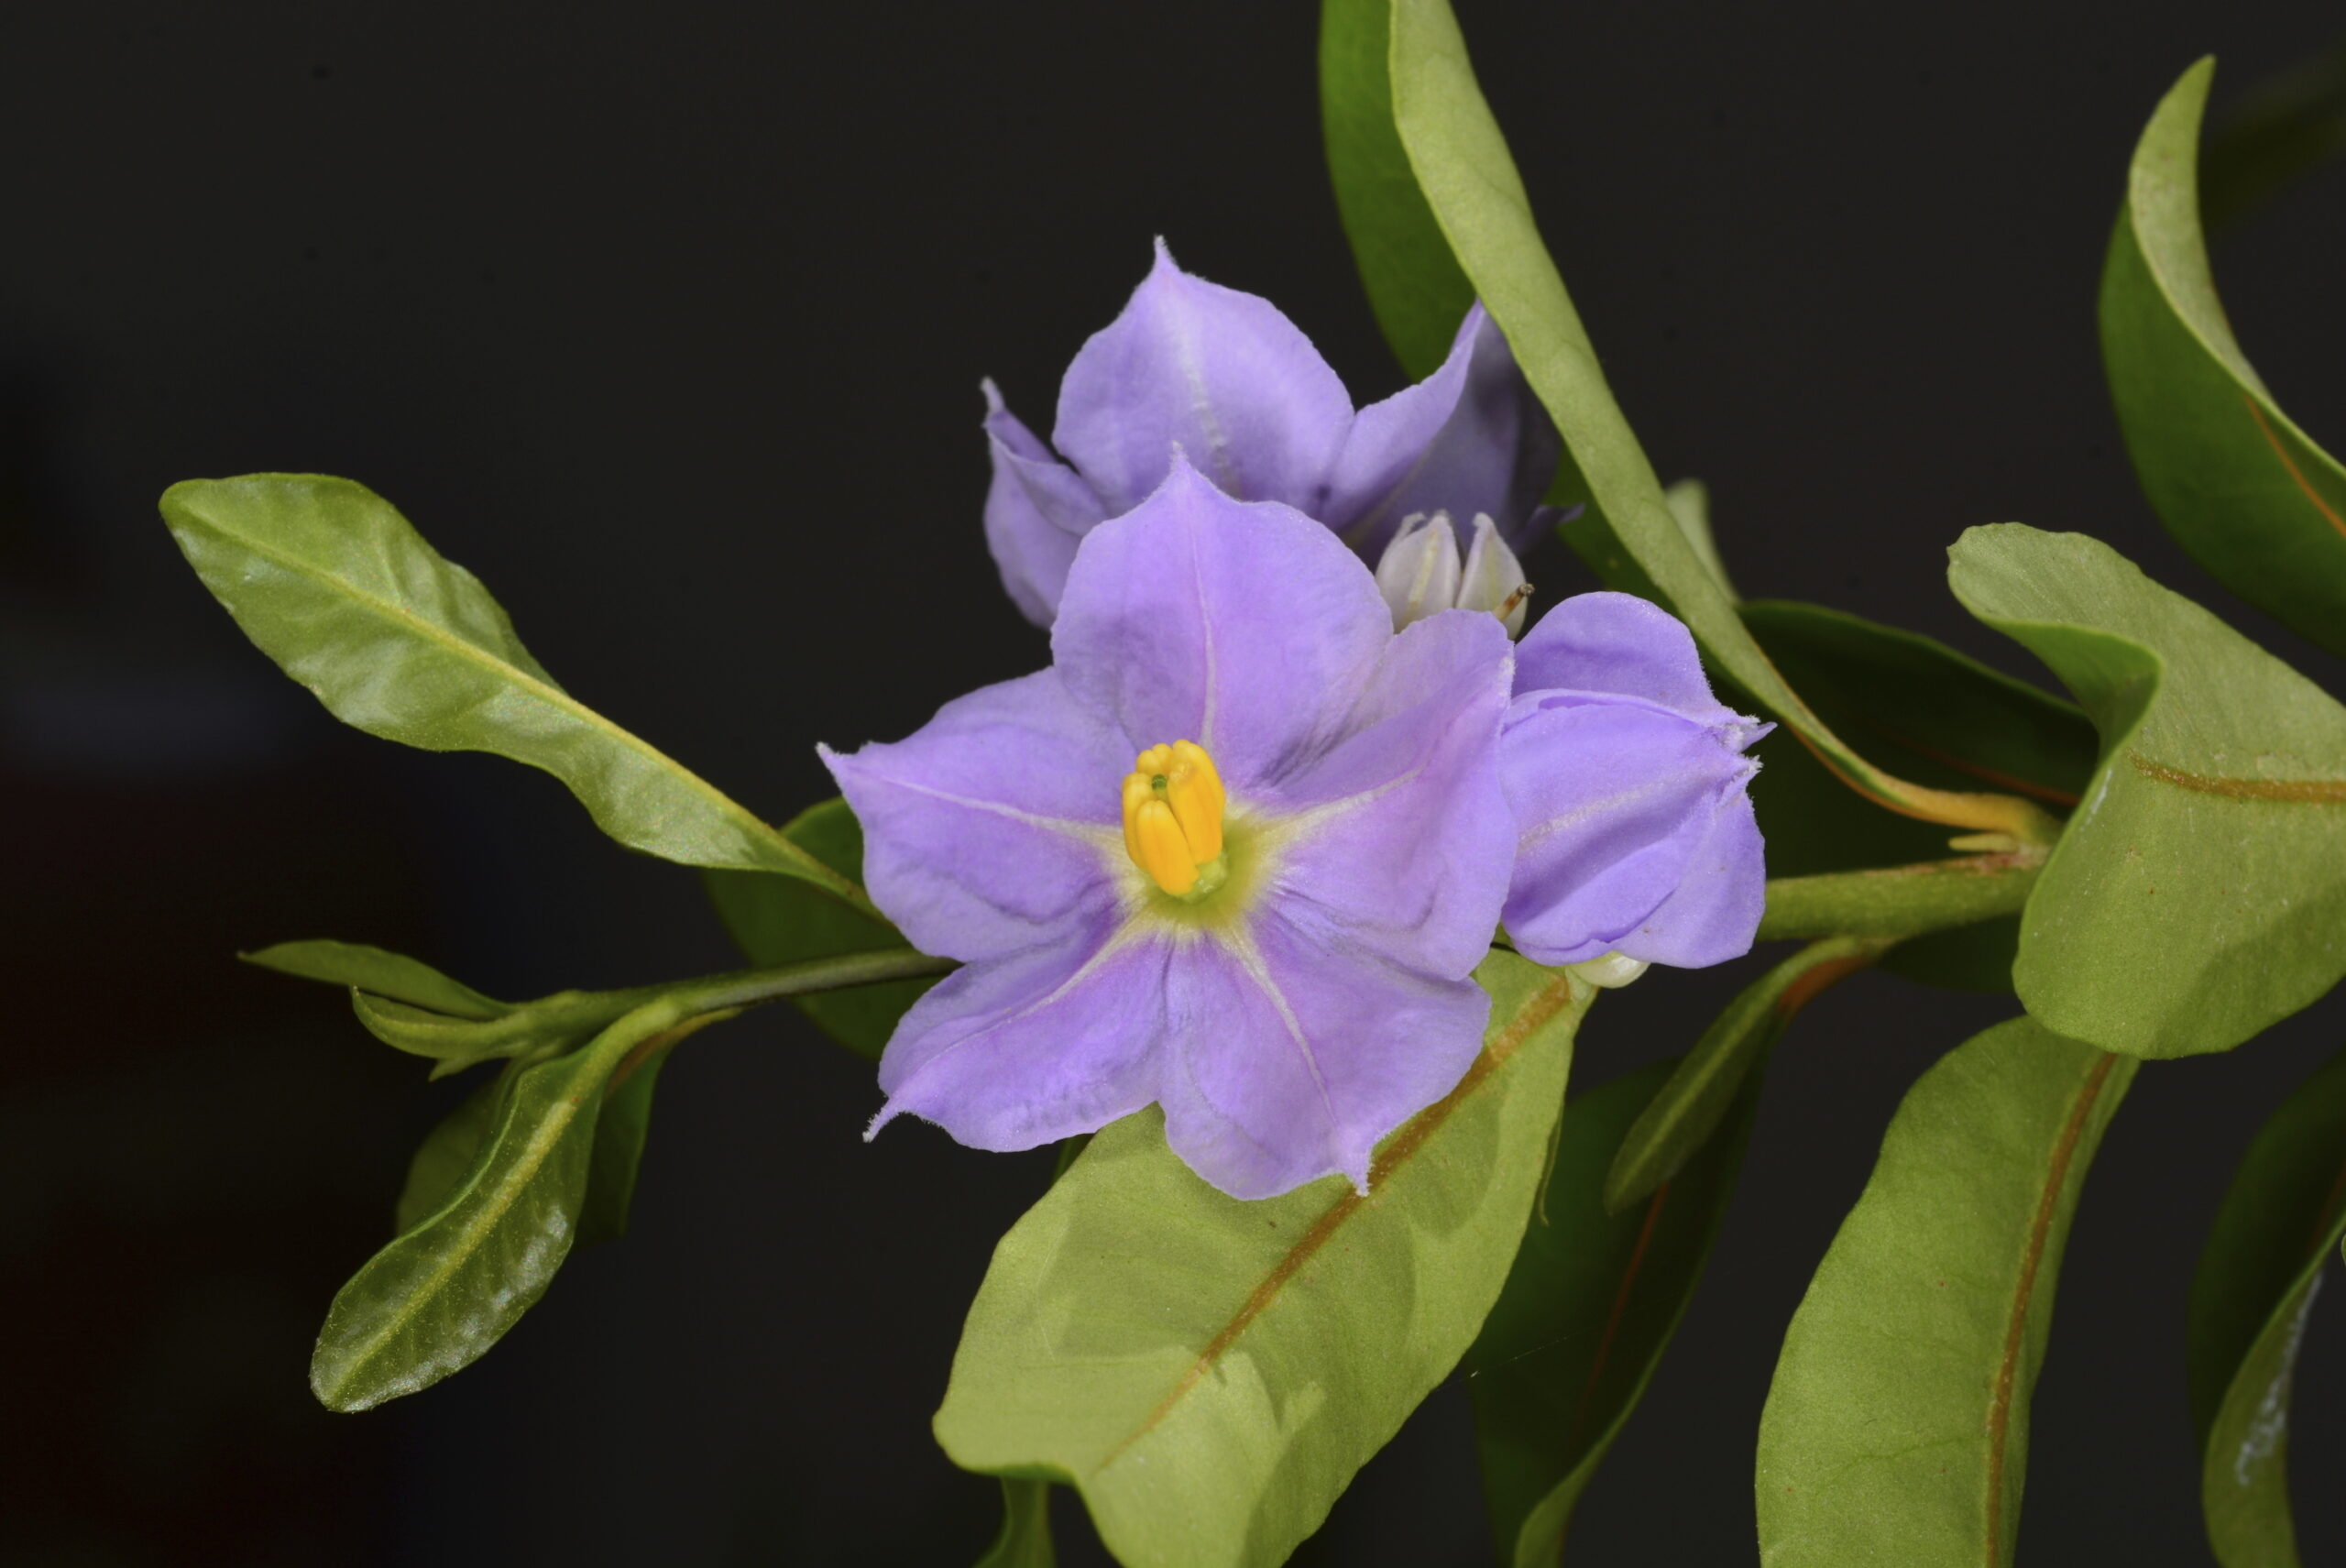 This image released by the U.S. Fish and Wildlife Service shows a flower from a shrub known as marr...